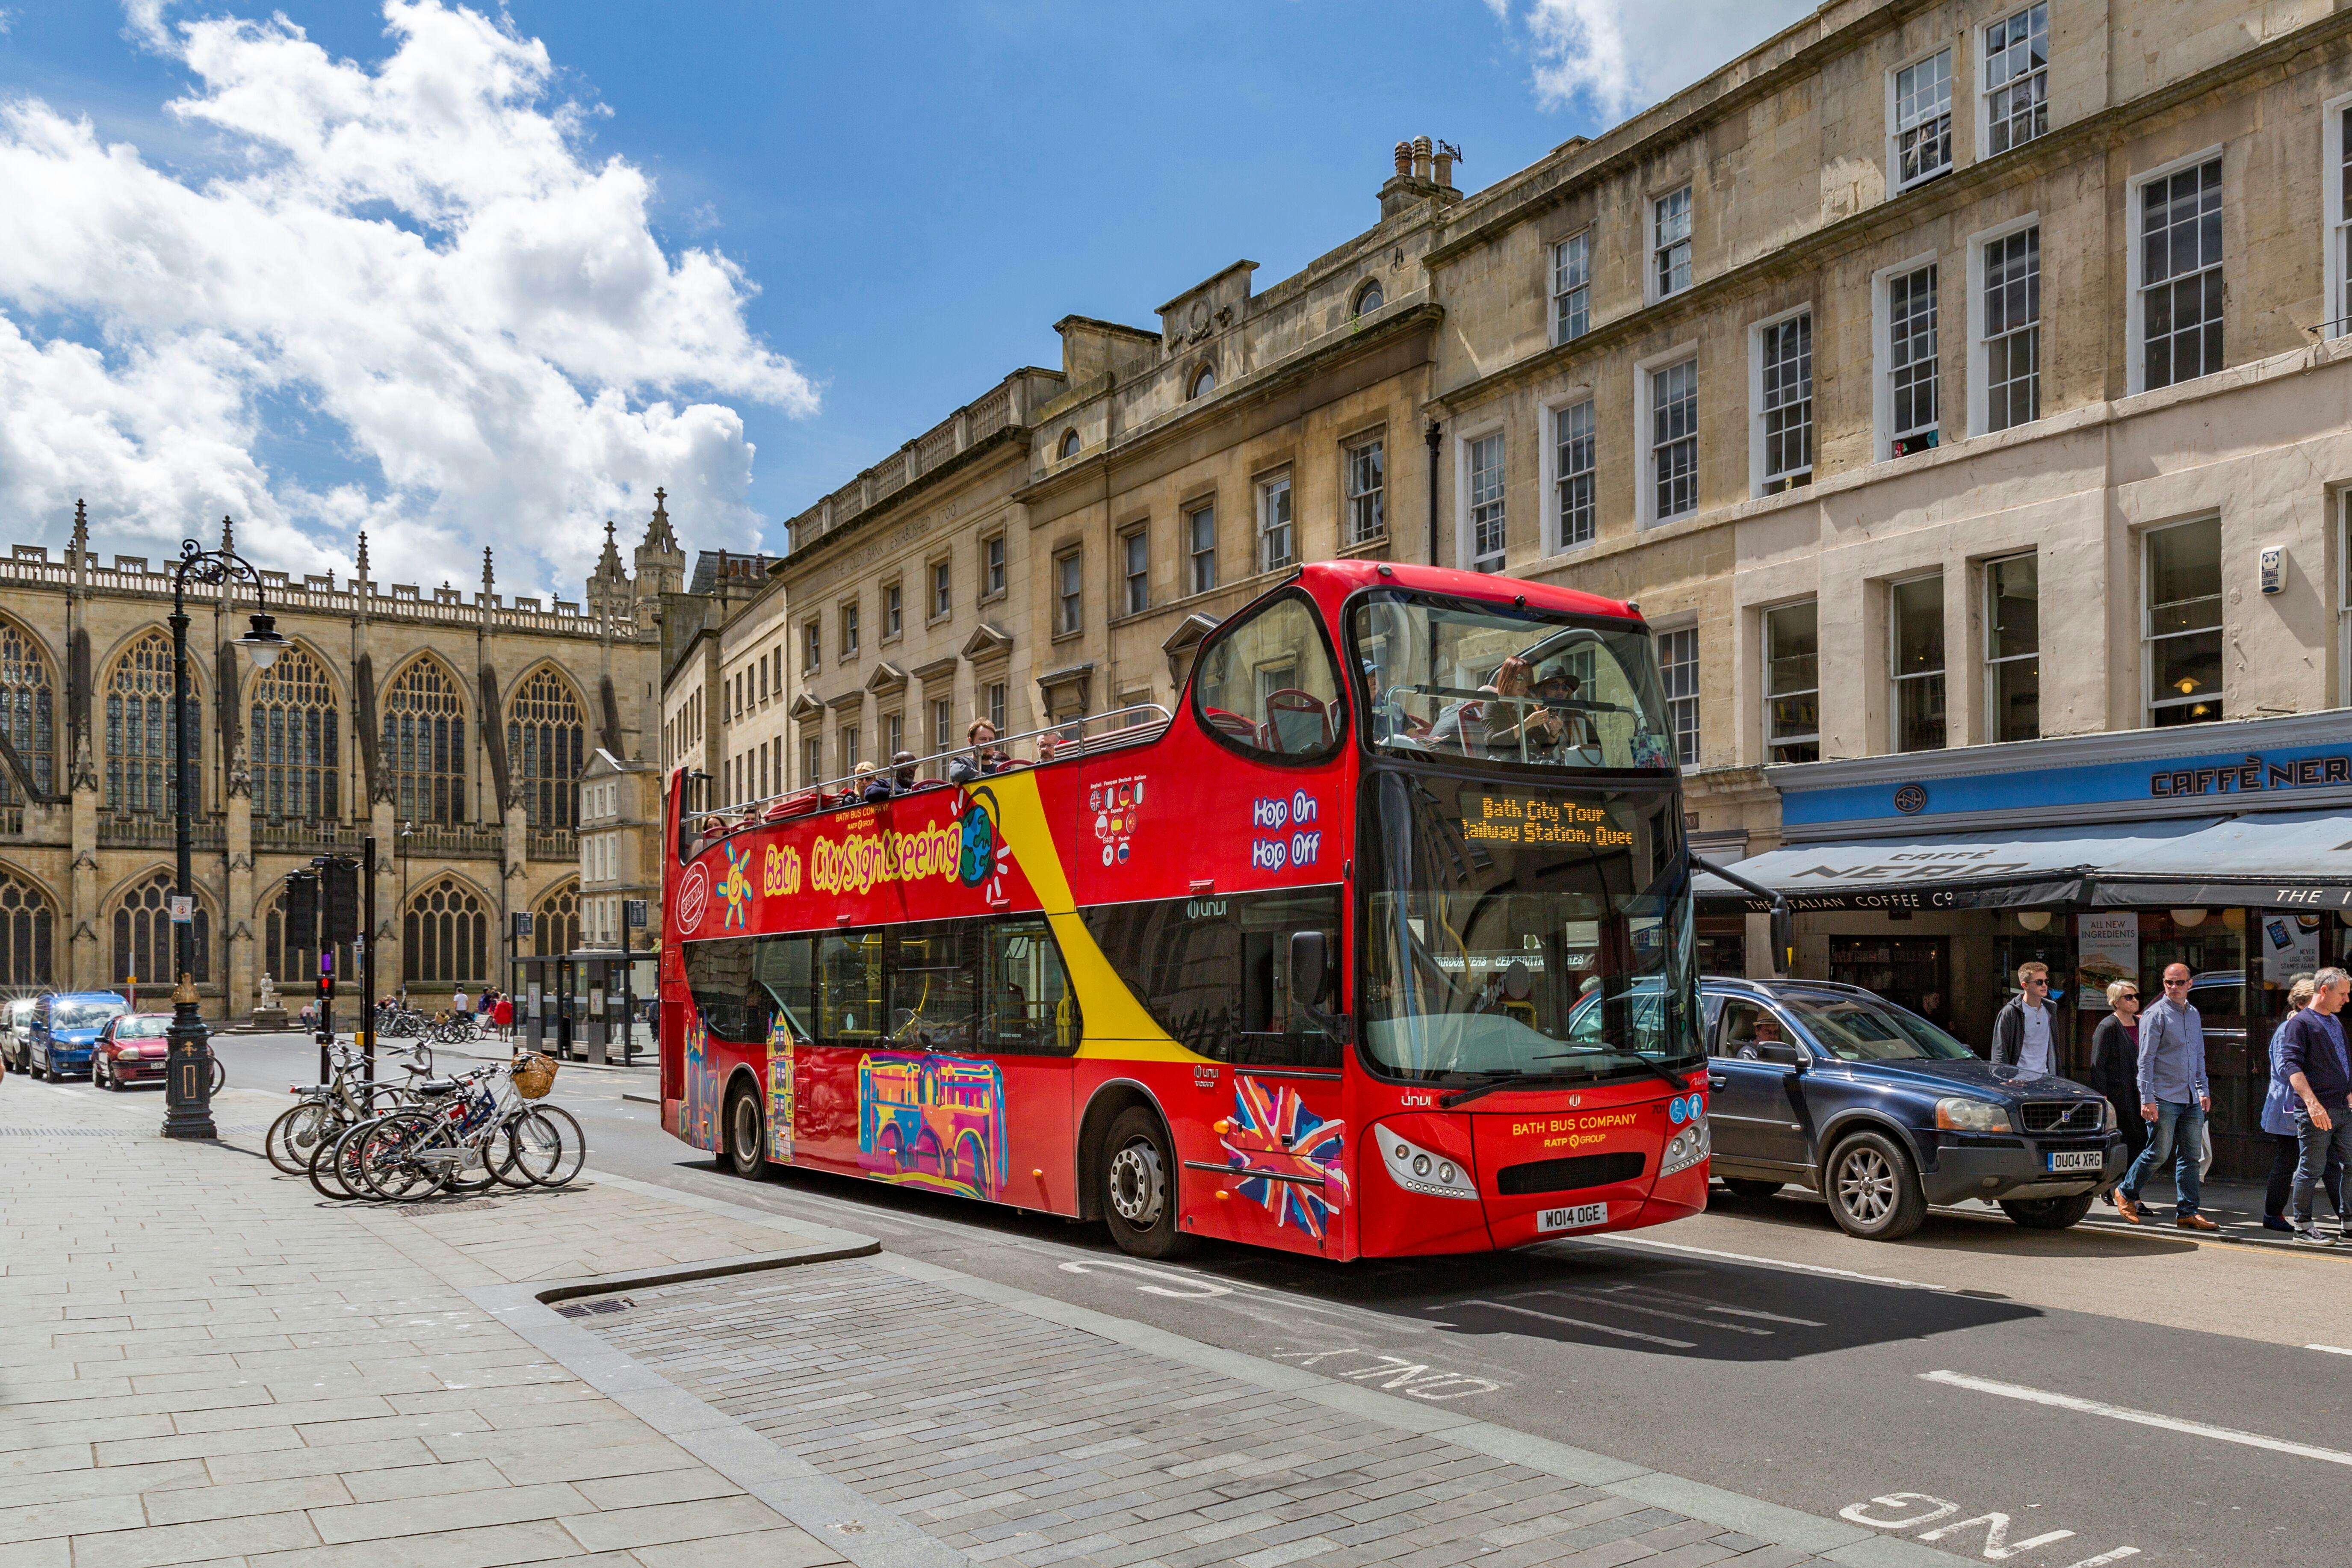 24-hour hop-on hop-off City Sightseeing bus tour of Bath